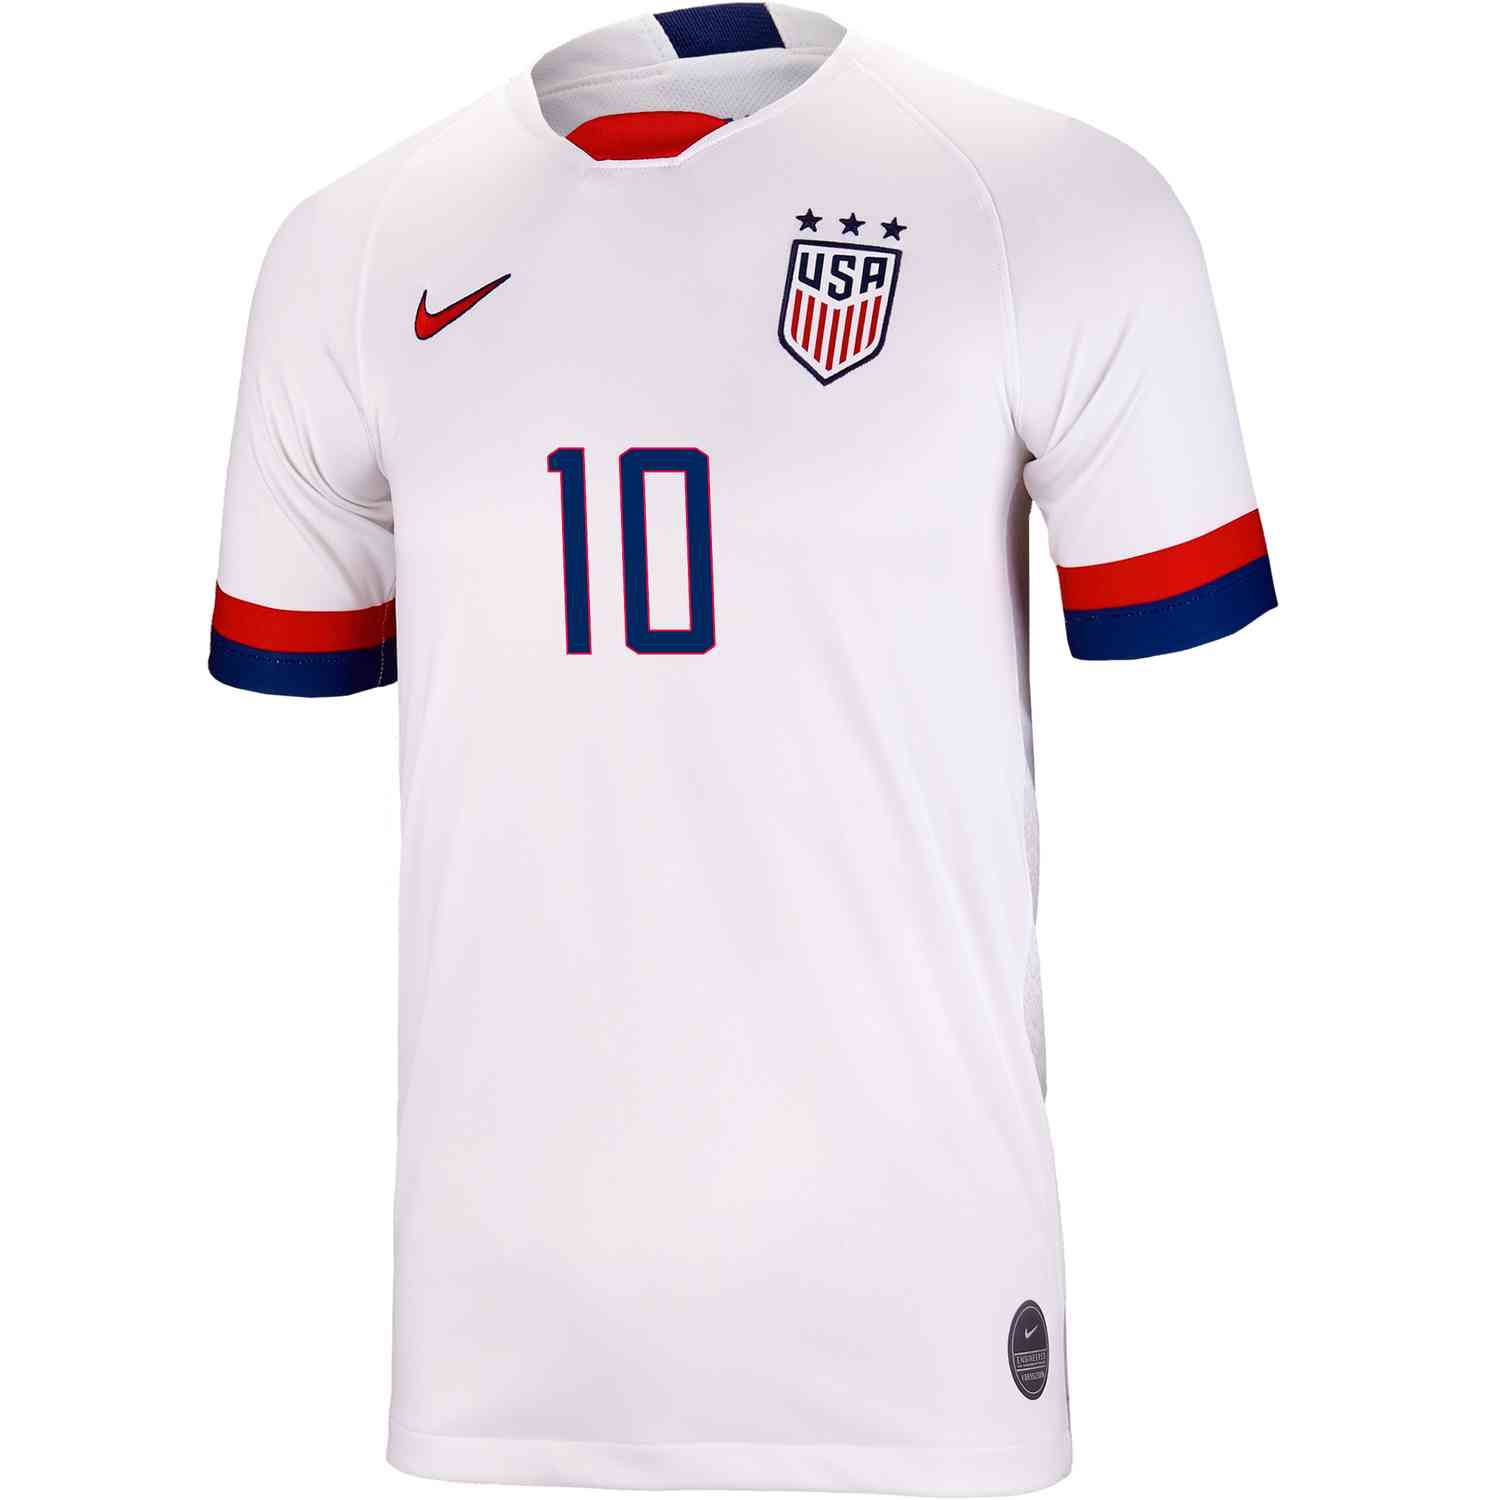 michelle akers jersey